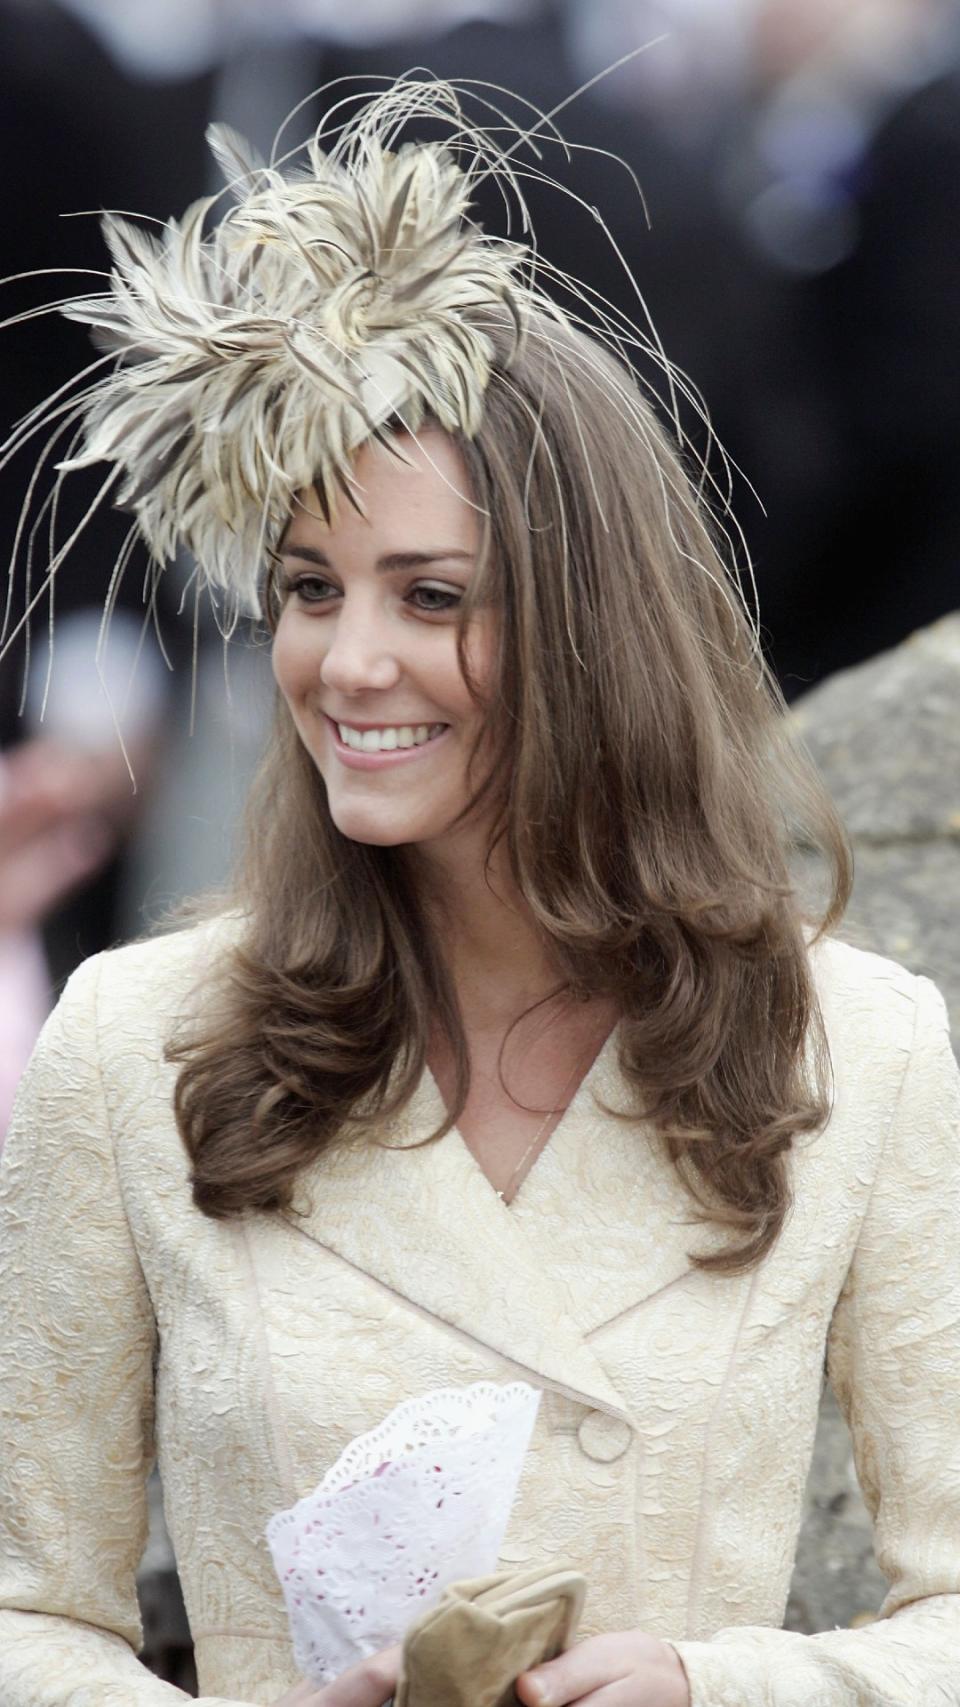 <p> Princess Catherine worked as an accessories buyer for British clothing retailer Jigsaw and helped design a necklace back in 2006. After a year in the role, Kate went on to work at mum Carole Middleton's events supply brand, Party Pieces. </p>